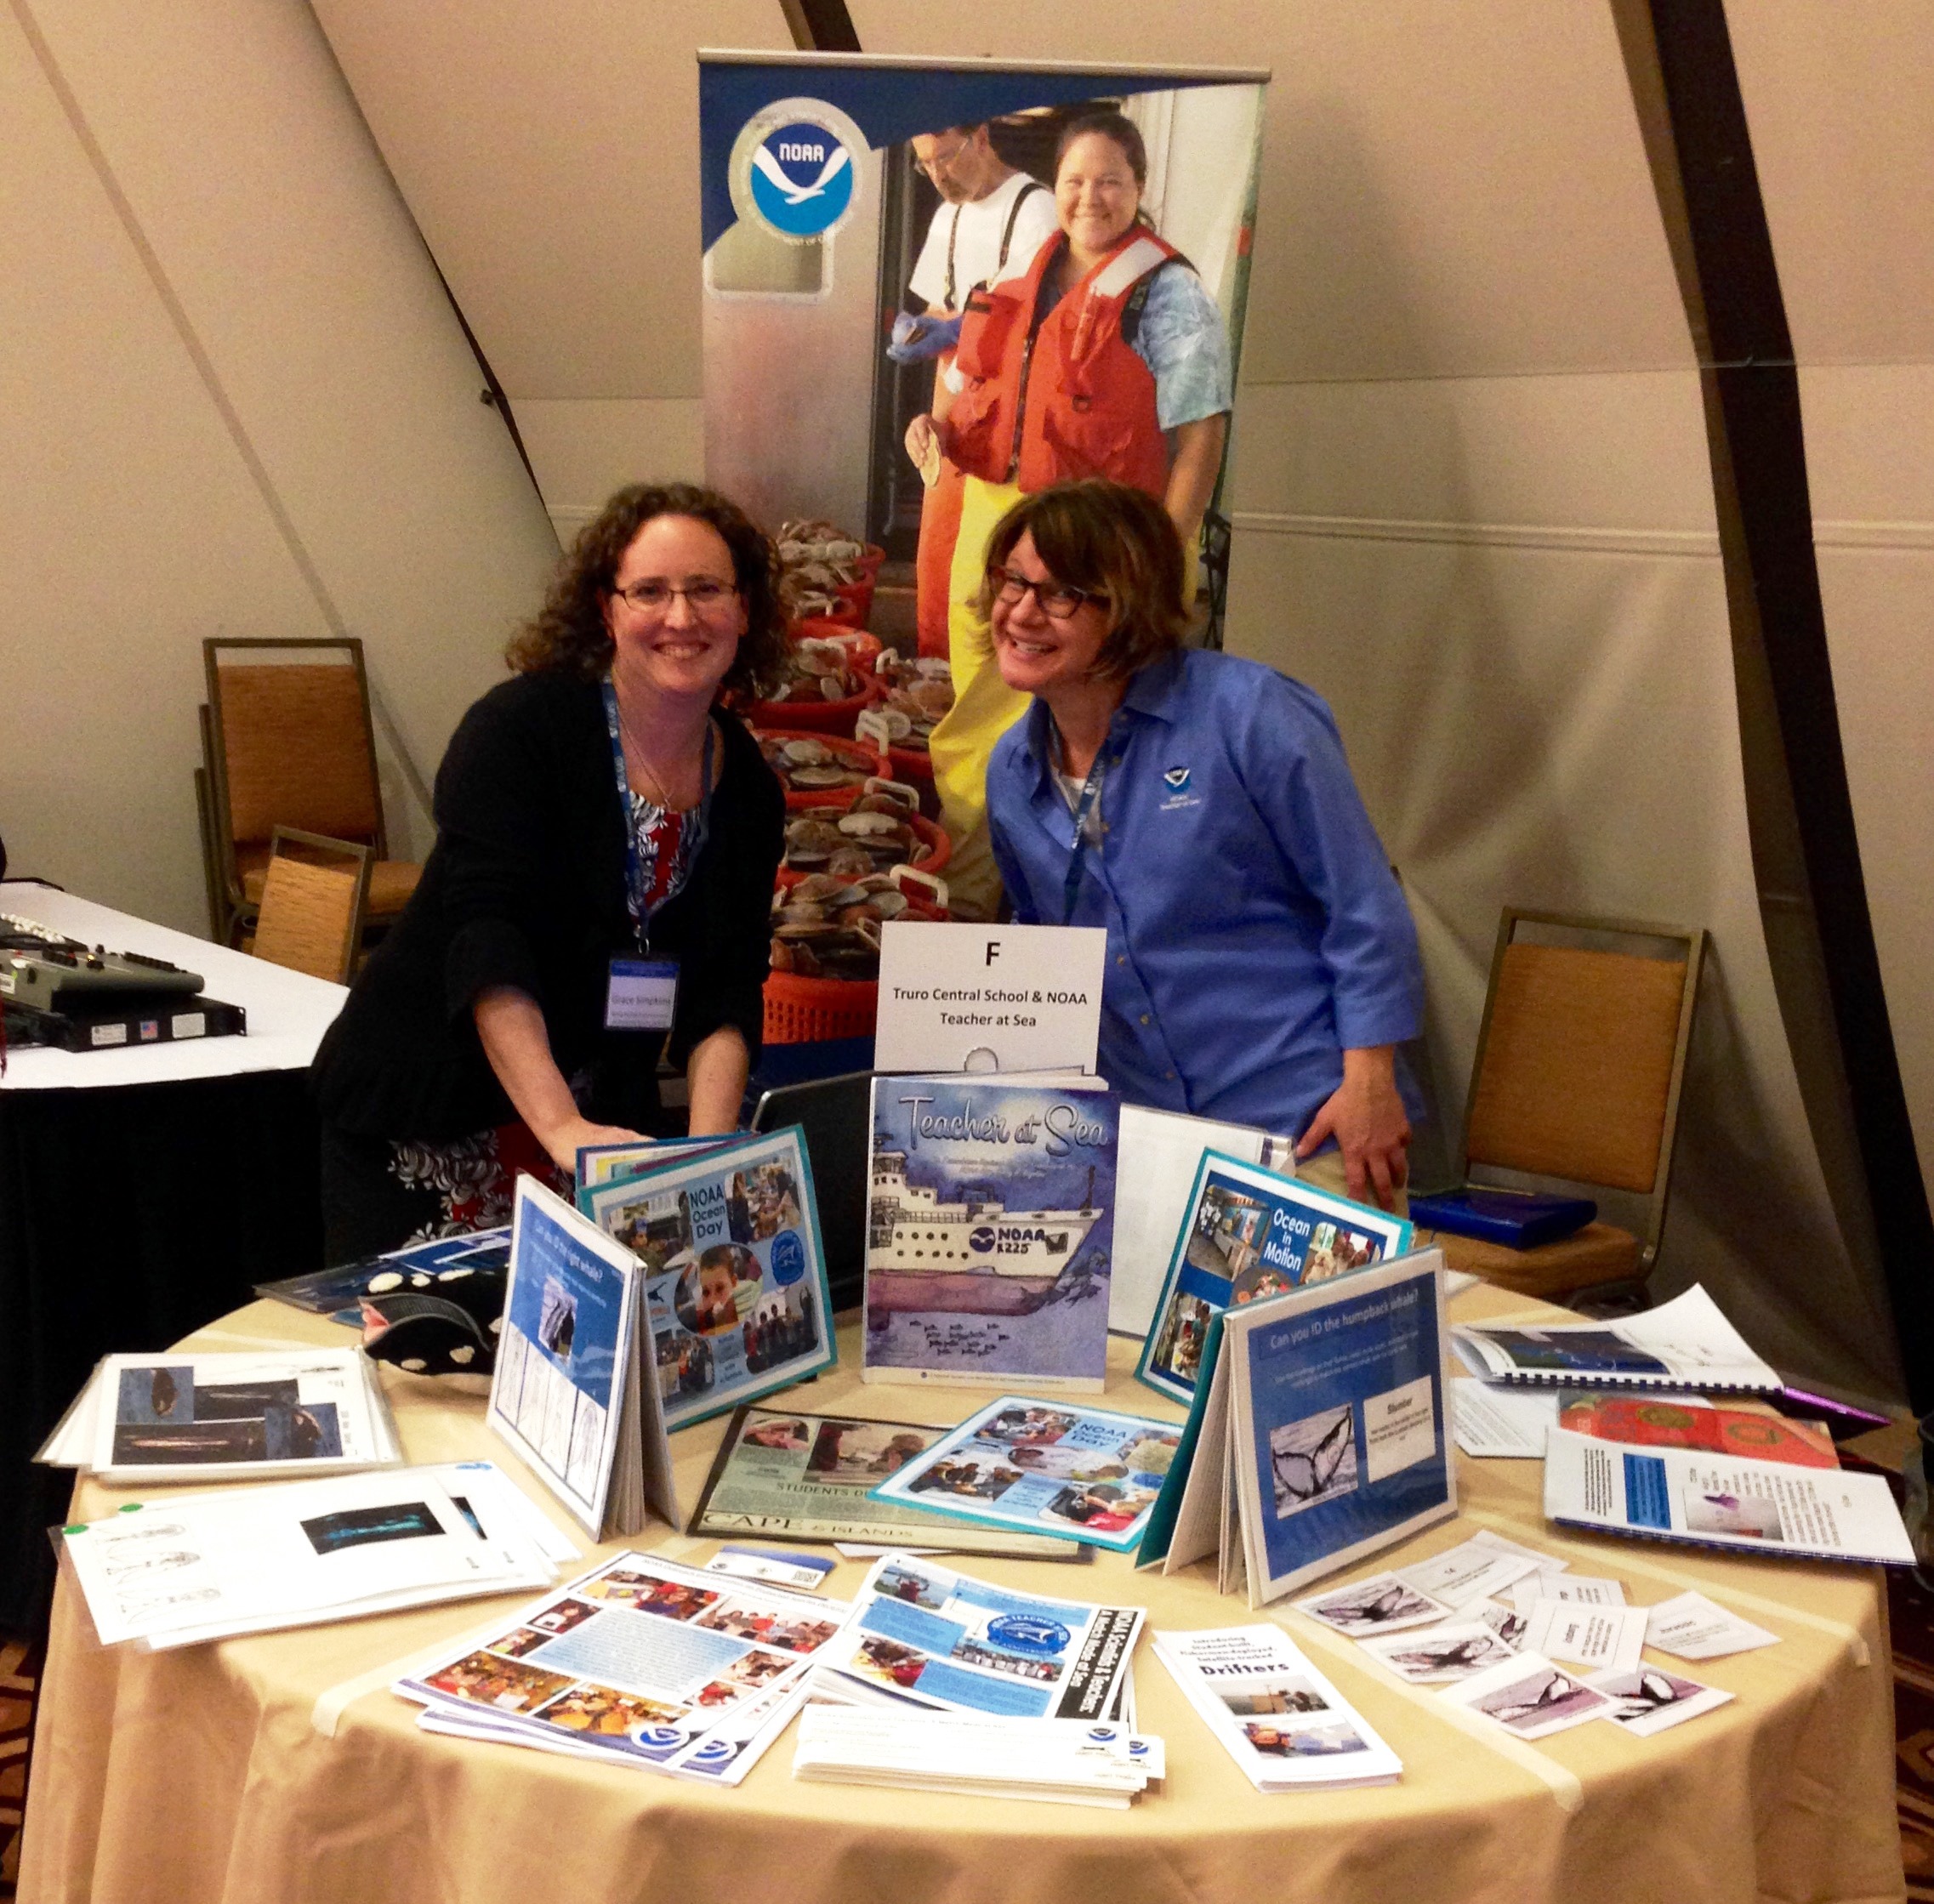 Two women stand in the middle of a NOAA Teacher at Sea sign behind them and a display table full of items in front of them.